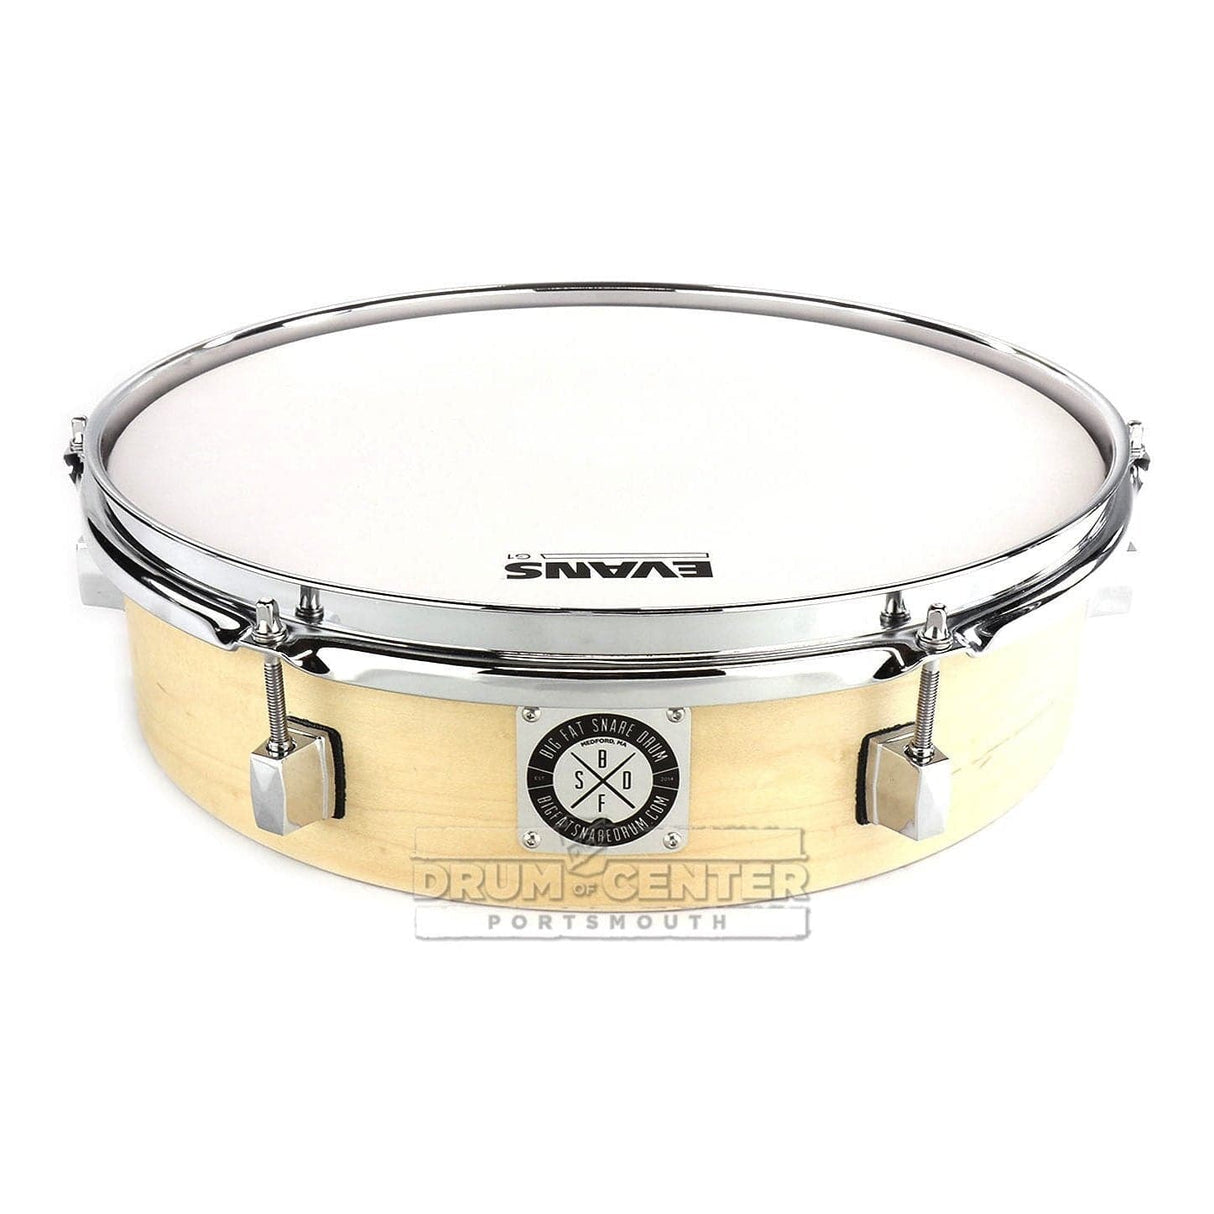 Big Fat Snare Drum Open Air Side Snare Drum 14x3.5